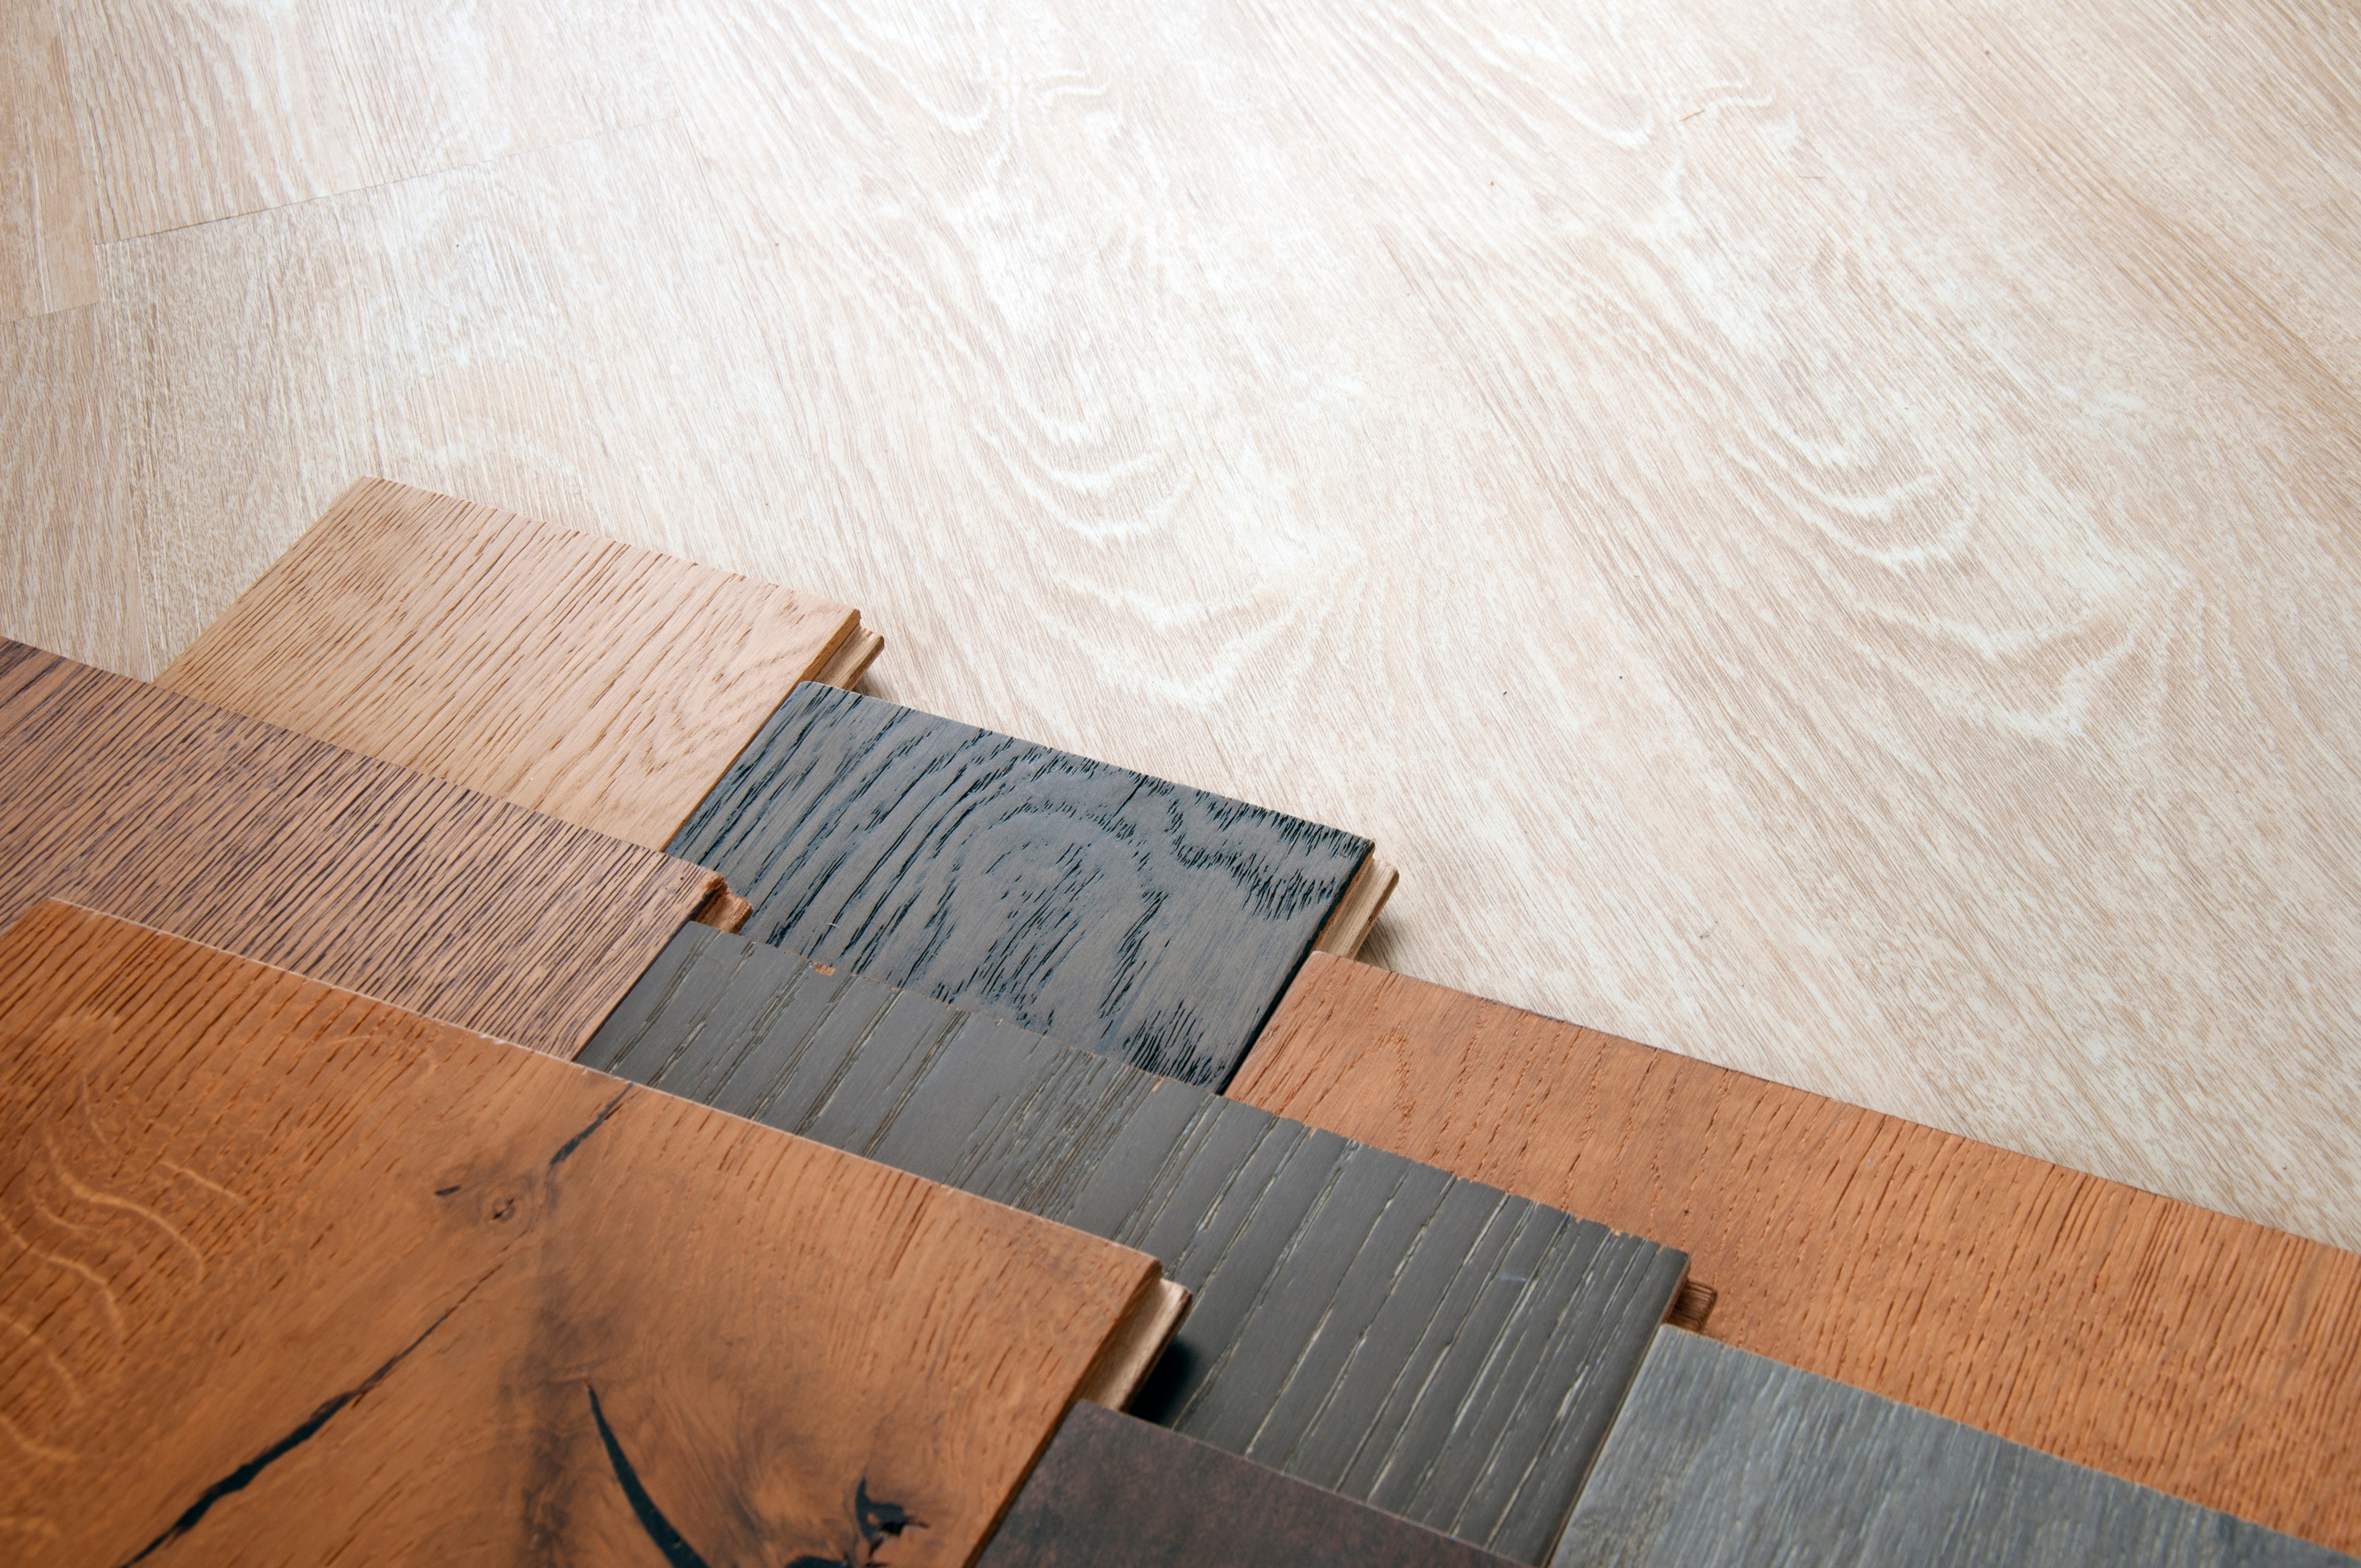 Prefinished Hardwood Flooring Is It, What Is The Best Way To Clean Prefinished Hardwood Floors